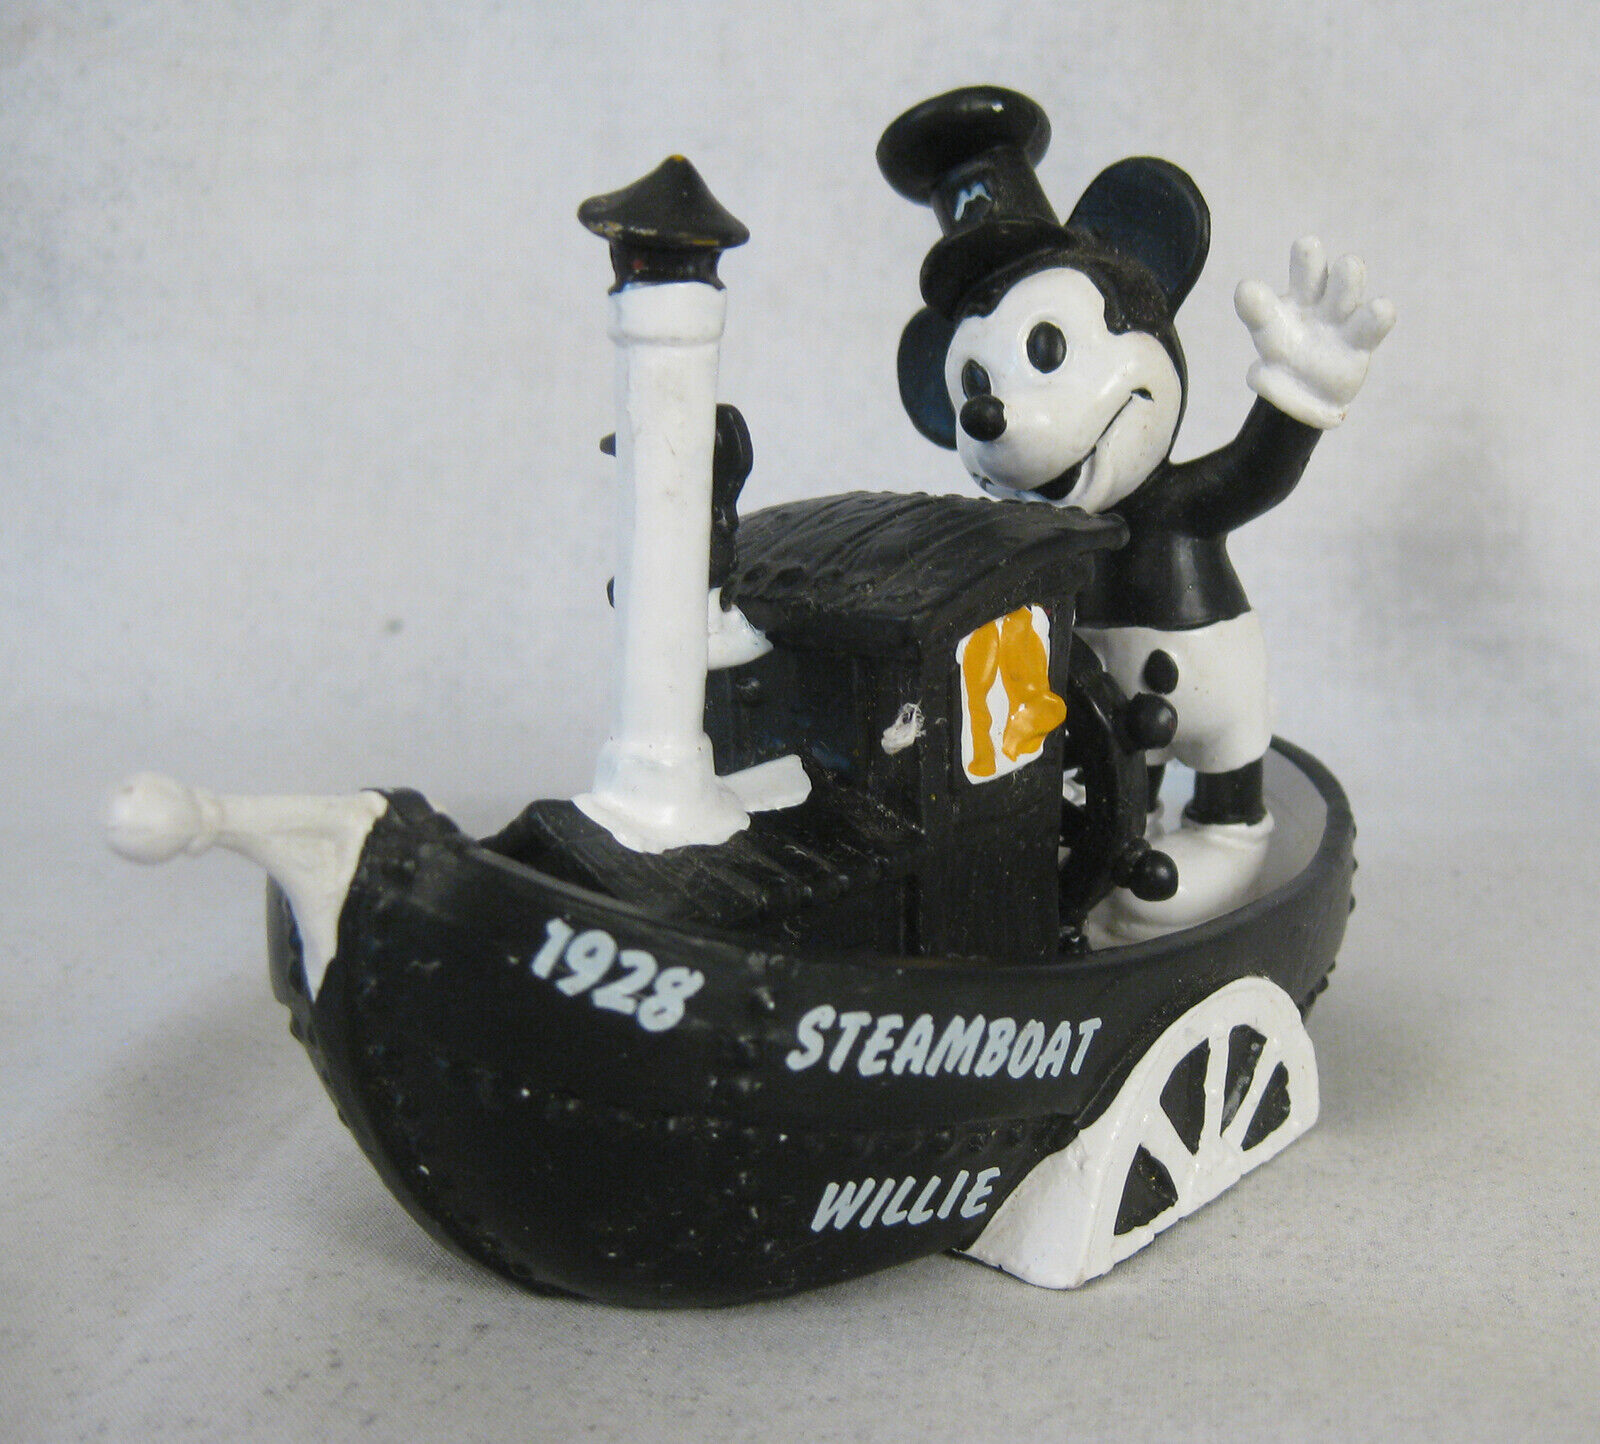 Vintage 1988 Bully West Germany Disney Steamboat Willie Mickey Mouse PVC Figure